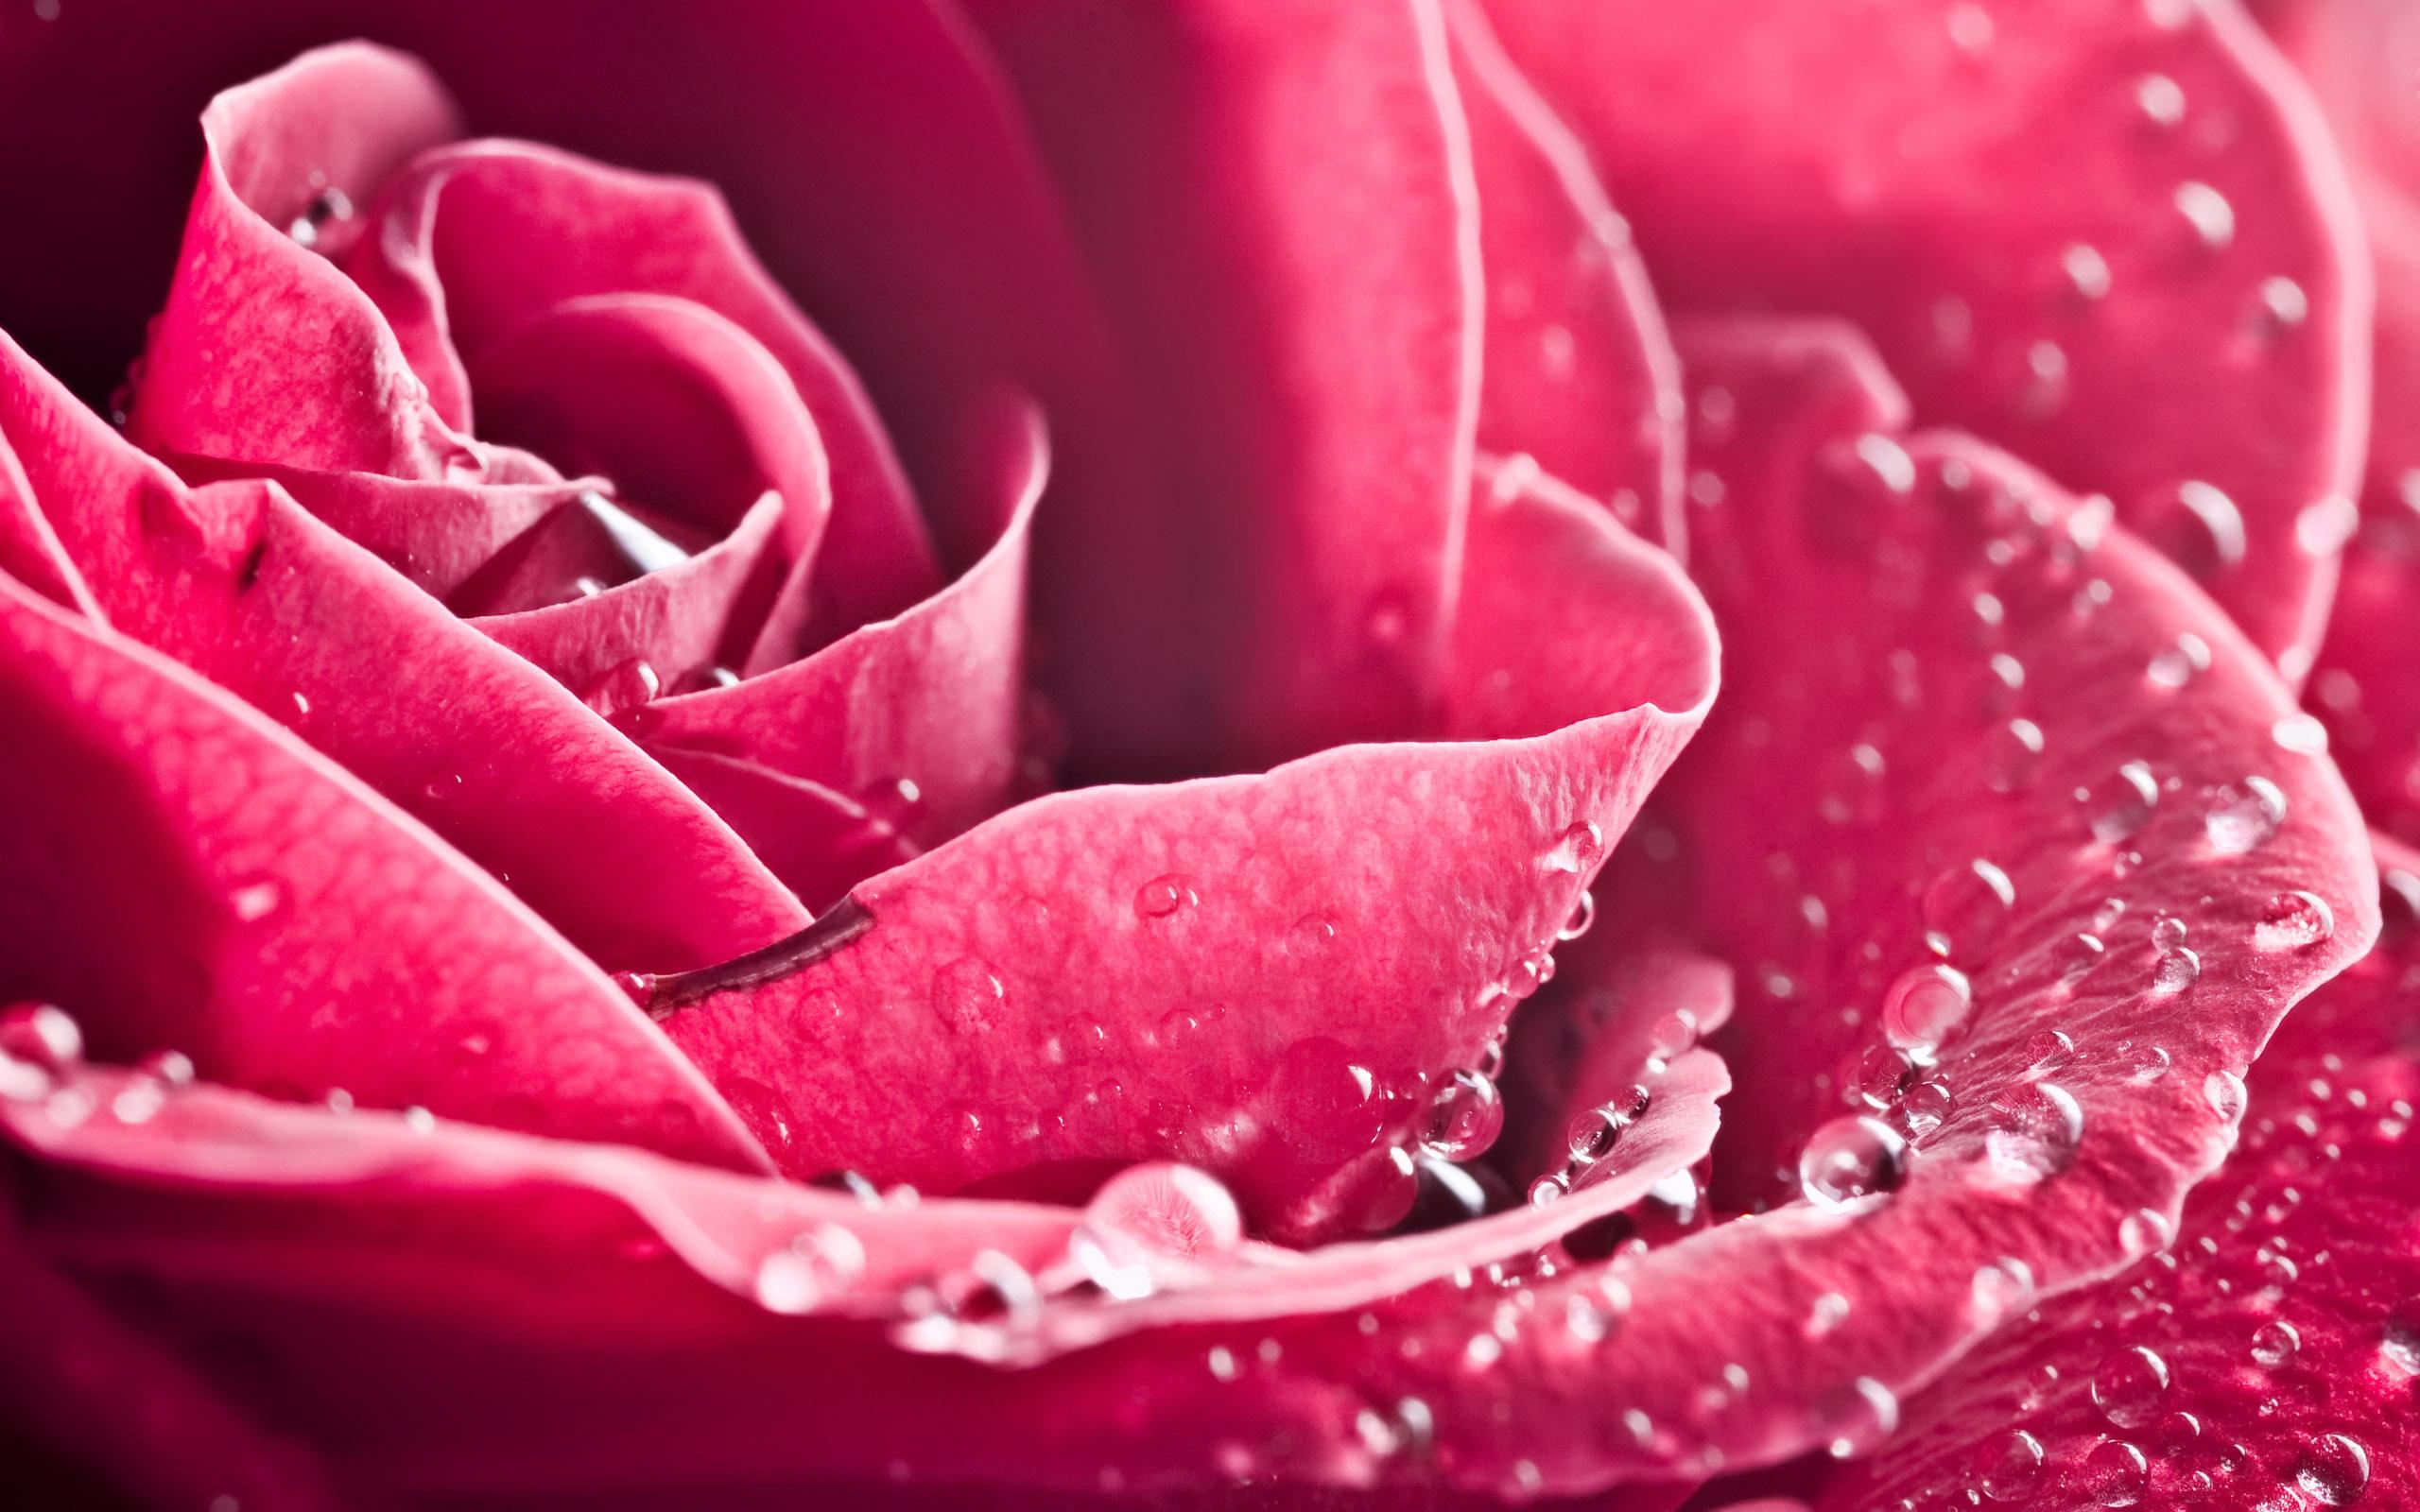 Download Wallpaper Rosen Gallery - Happy Rose Day 2019 Images Download , HD Wallpaper & Backgrounds